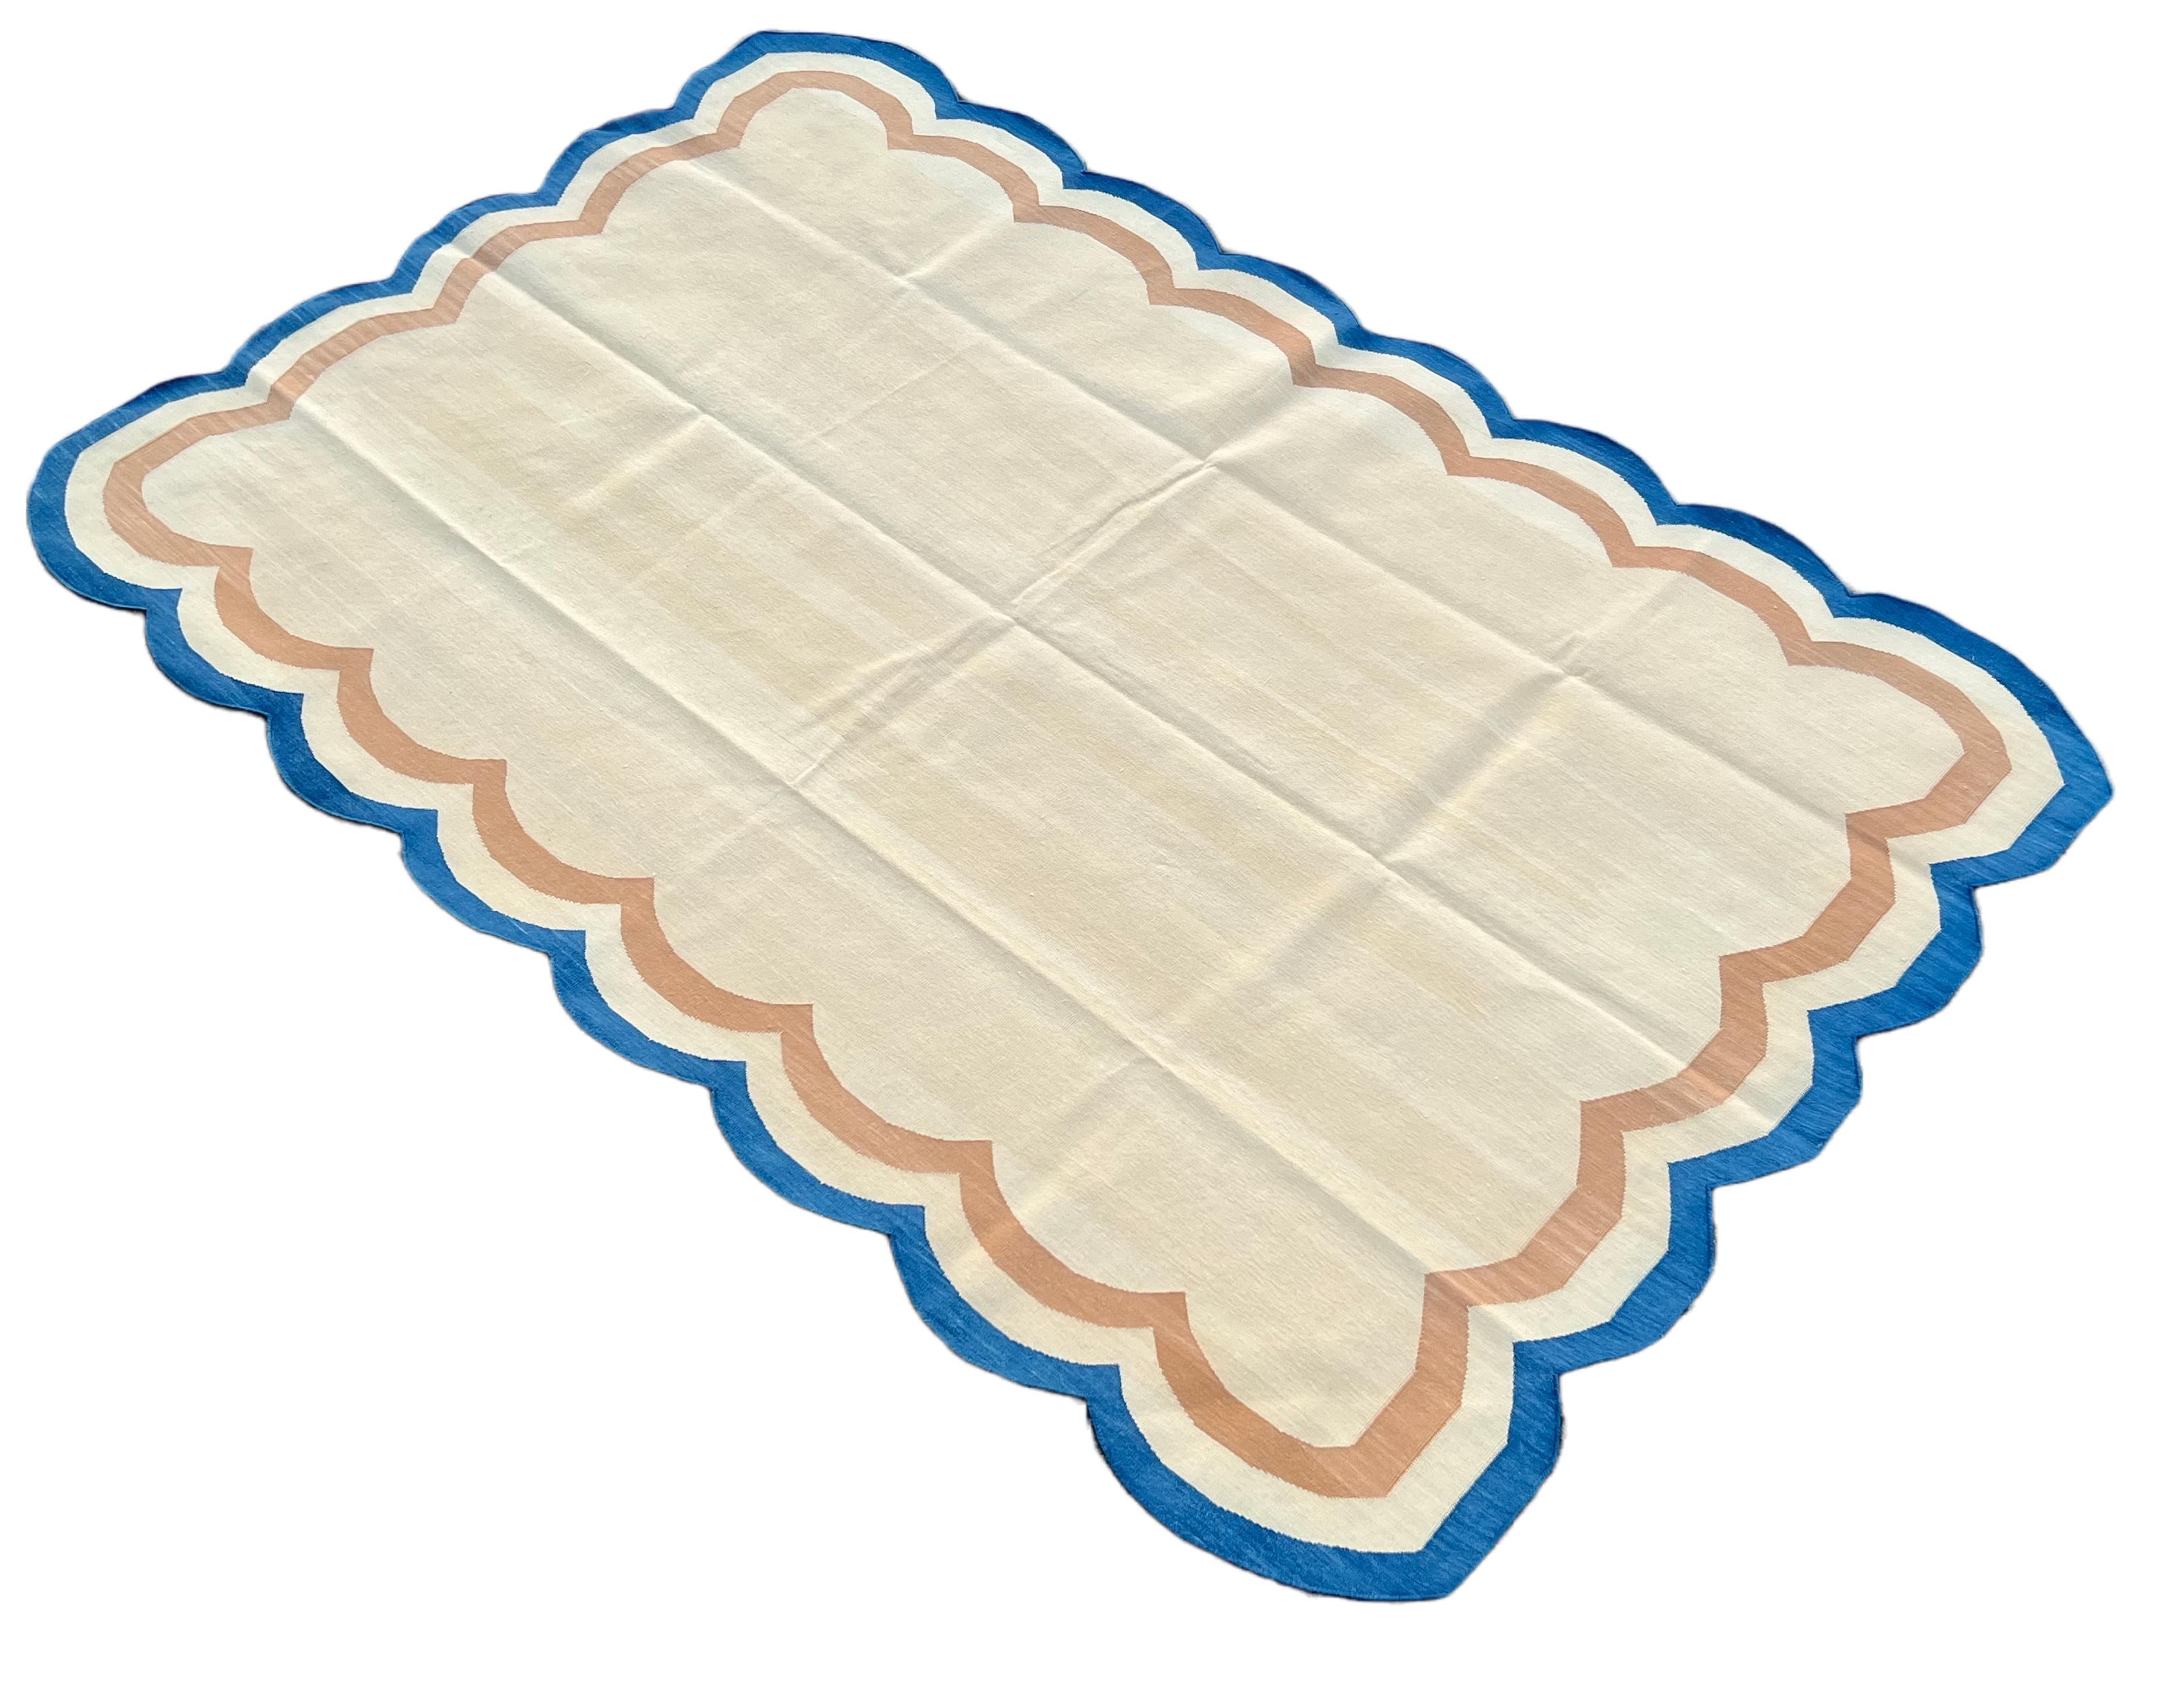 Cotton Vegetable Dyed Reversible Cream, Mustard And Blue Four Sided Scalloped Indian Rug - 5'x8'
These special flat-weave dhurries are hand-woven with 15 ply 100% cotton yarn. Due to the special manufacturing techniques used to create our rugs, the